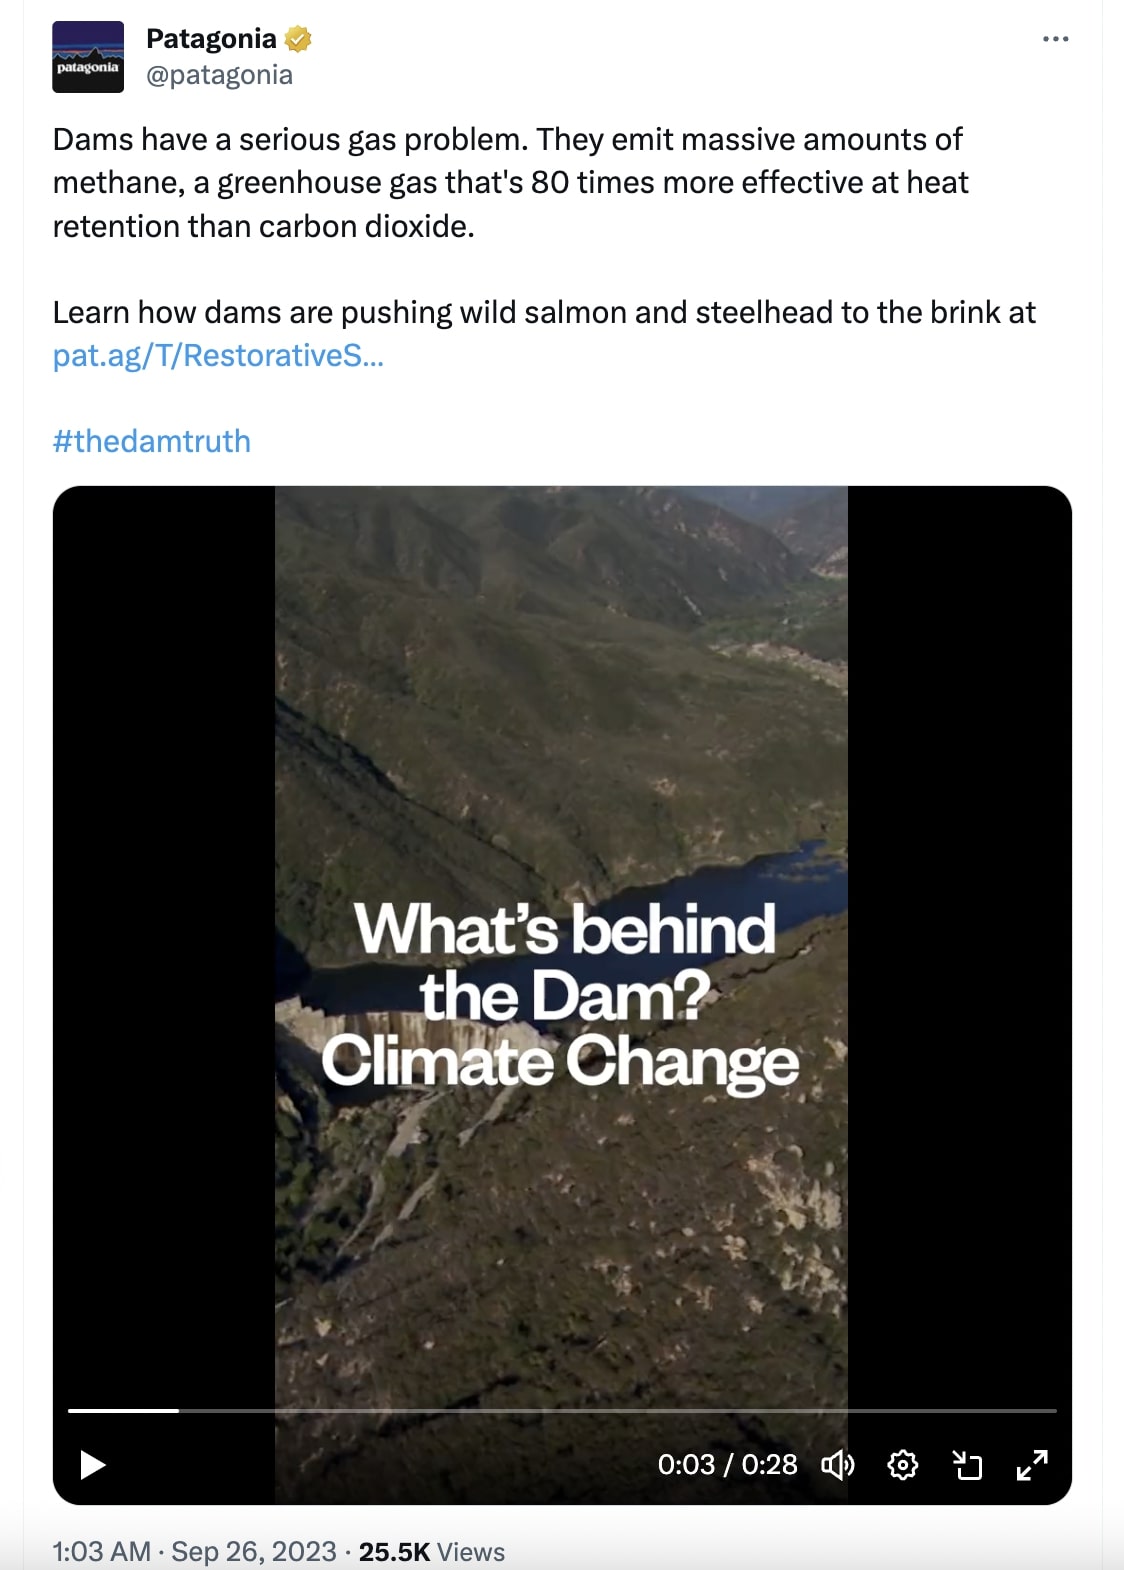 Patagonia's post on X about the effect of dams on greenhouse gas emissions